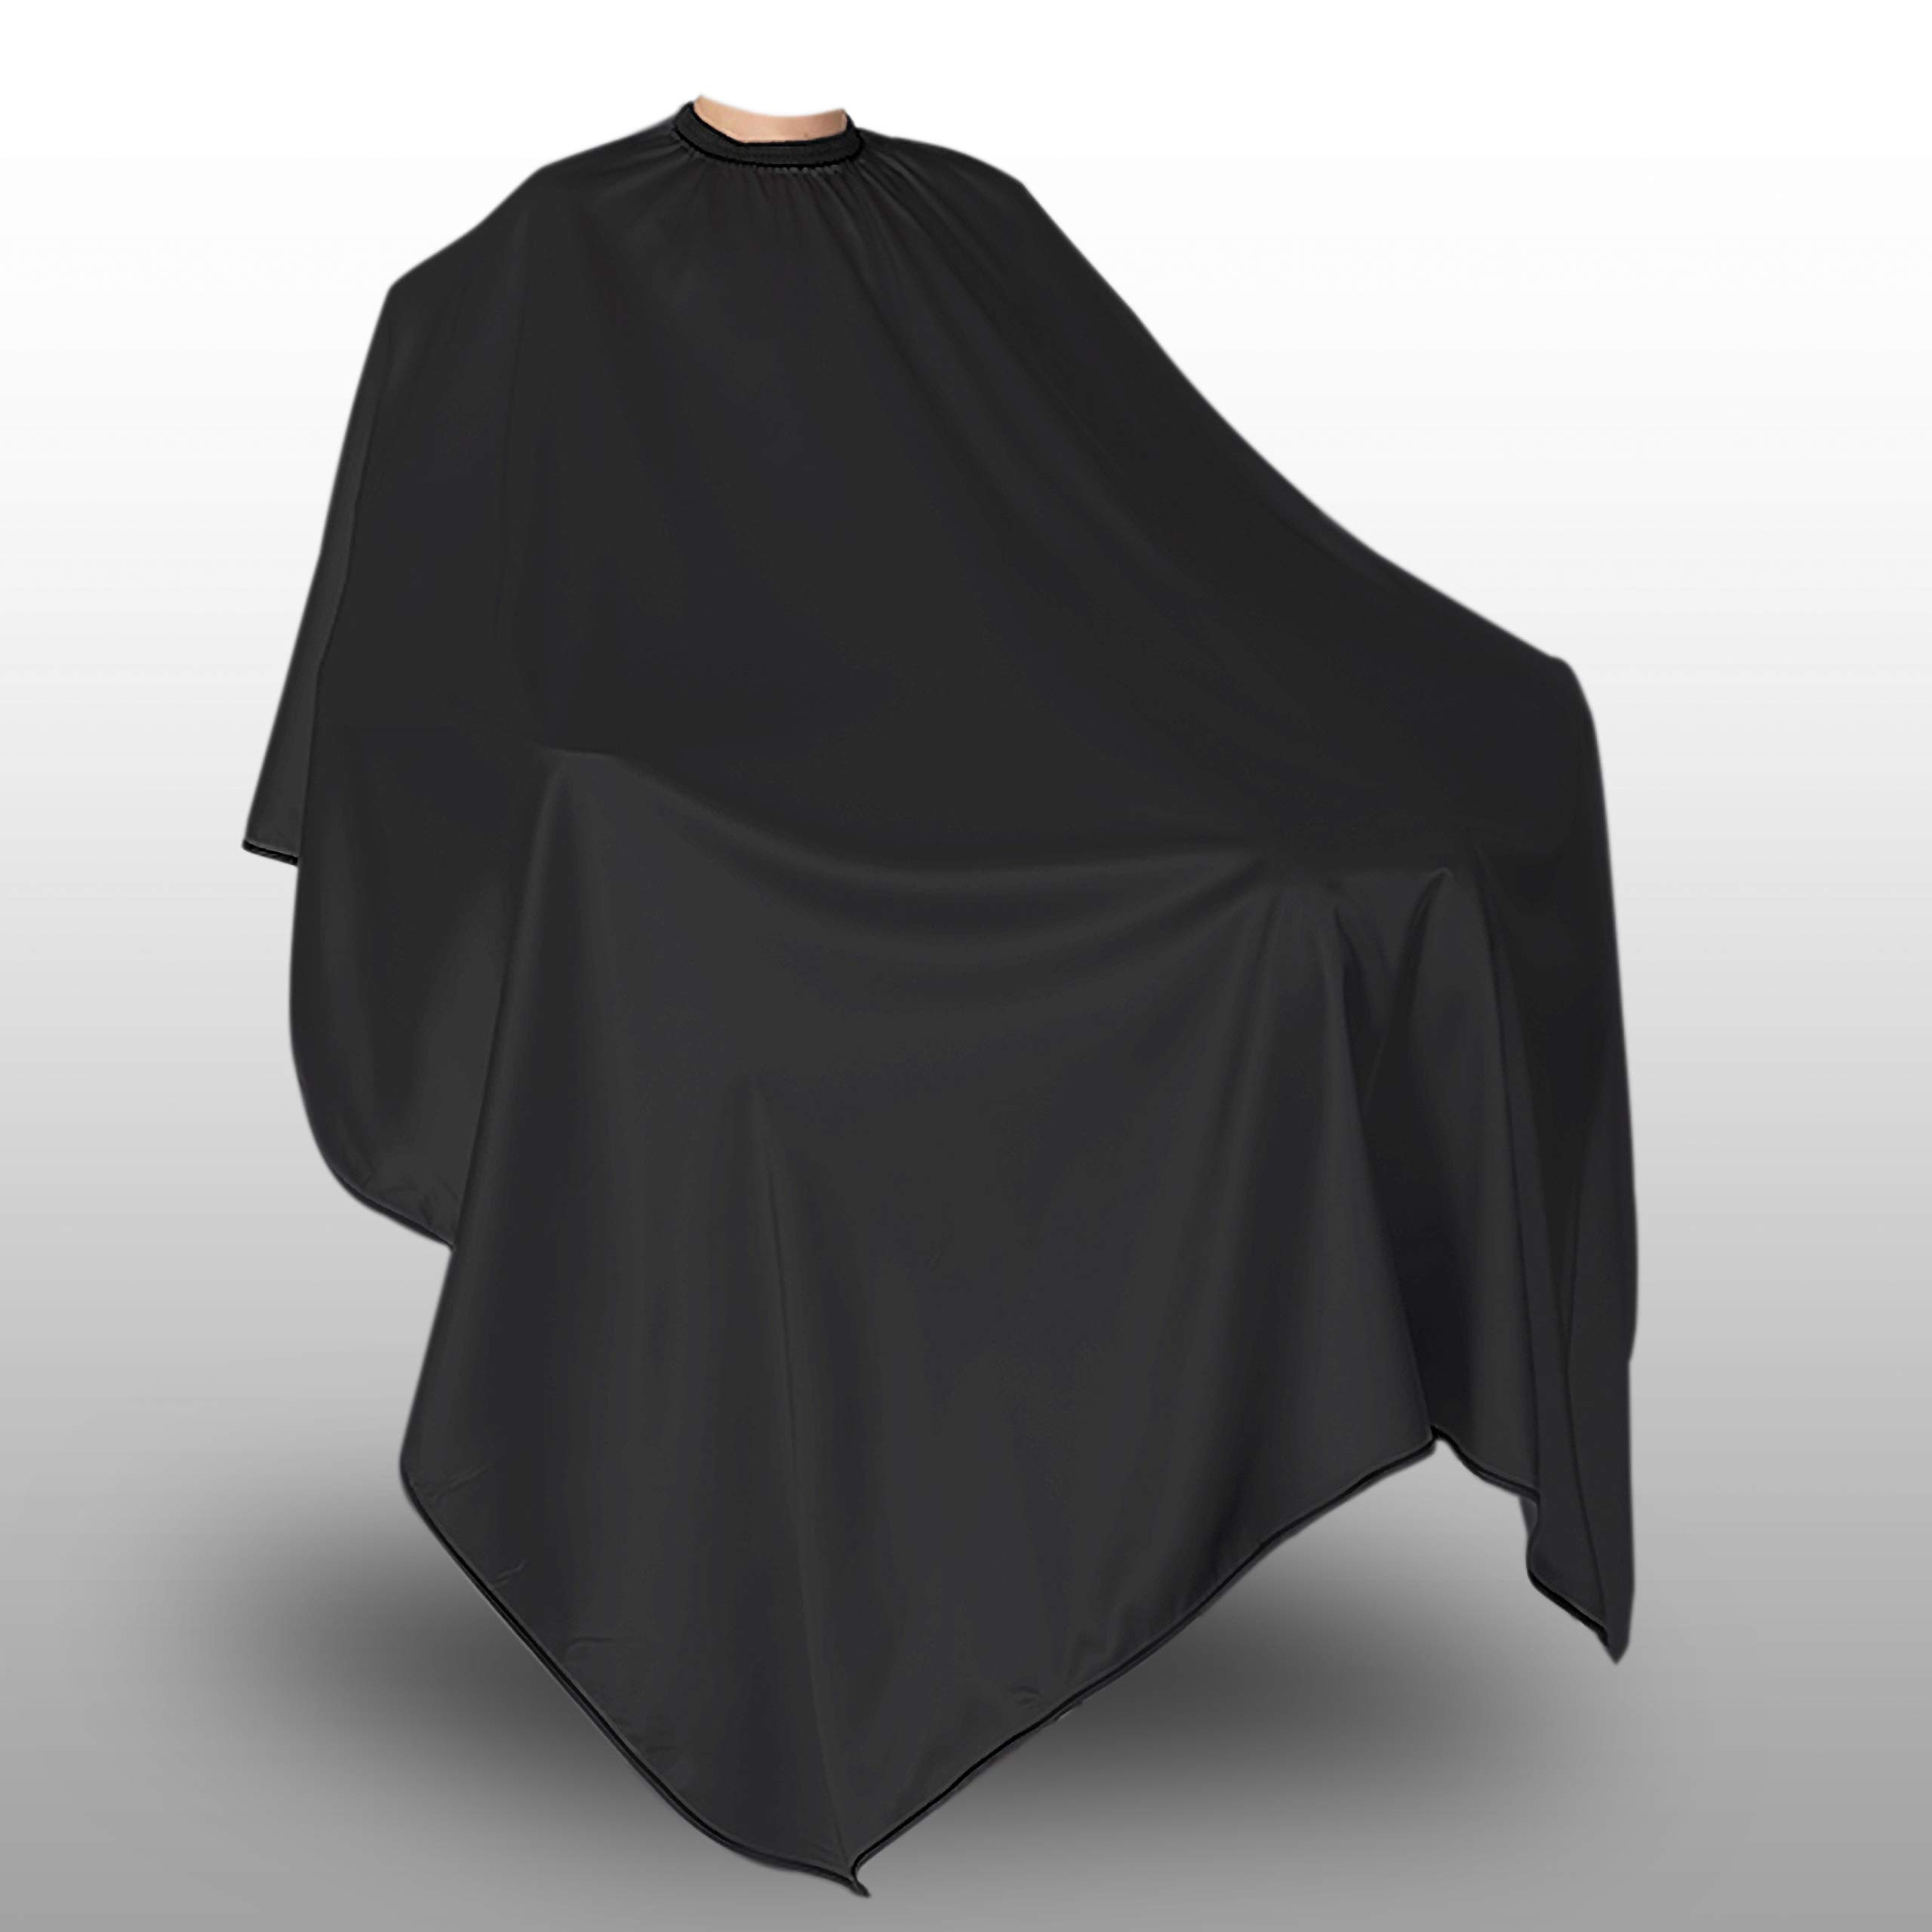 Delkinz Barber Cape Large Size with Adjustable Snap Closure waterproof Hair Cutting Salon Cape for men, women and kids black - Perfect for Hairstylists (51x59 Inch (Pack of 1))